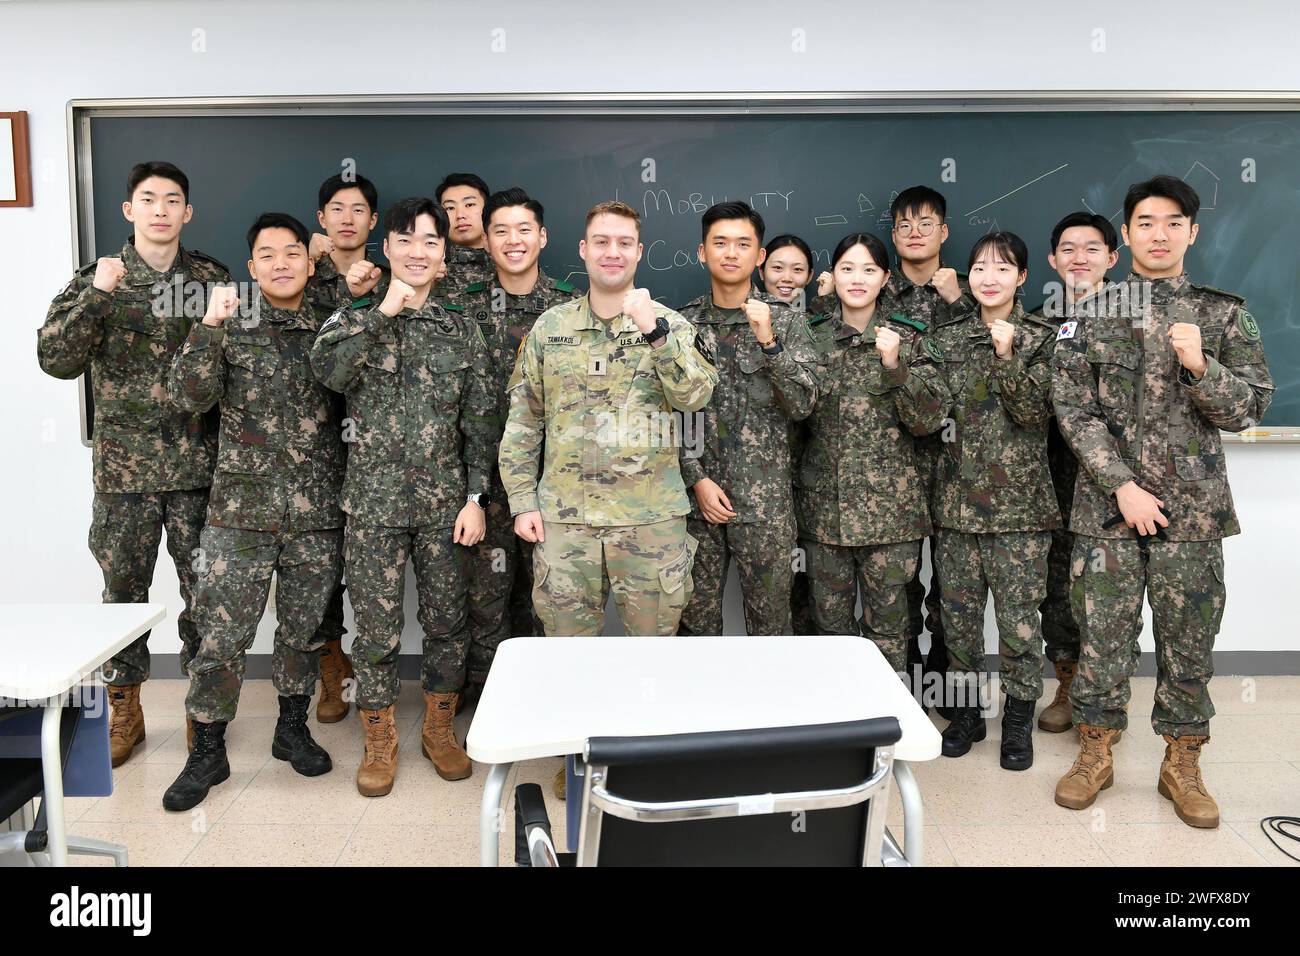 1st Lt. Adam Tawakkol, an engineering officer with 643rd Engineer Construction Company, 11th Engineer Battalion, 2nd Division Sustainment Brigade, 2nd Infantry Division/ROK U.S. Combined Division, poses with cadets from the Korean Military Academy in Seoul, South Korea, Jan. 12, 2024. The KMA and 2ID/RUCD have been expanding their cooperative relationship since signing a memorandum of understanding in 2016; and this interaction between cadets and U.S. officers is just one part of that expansion. Stock Photo